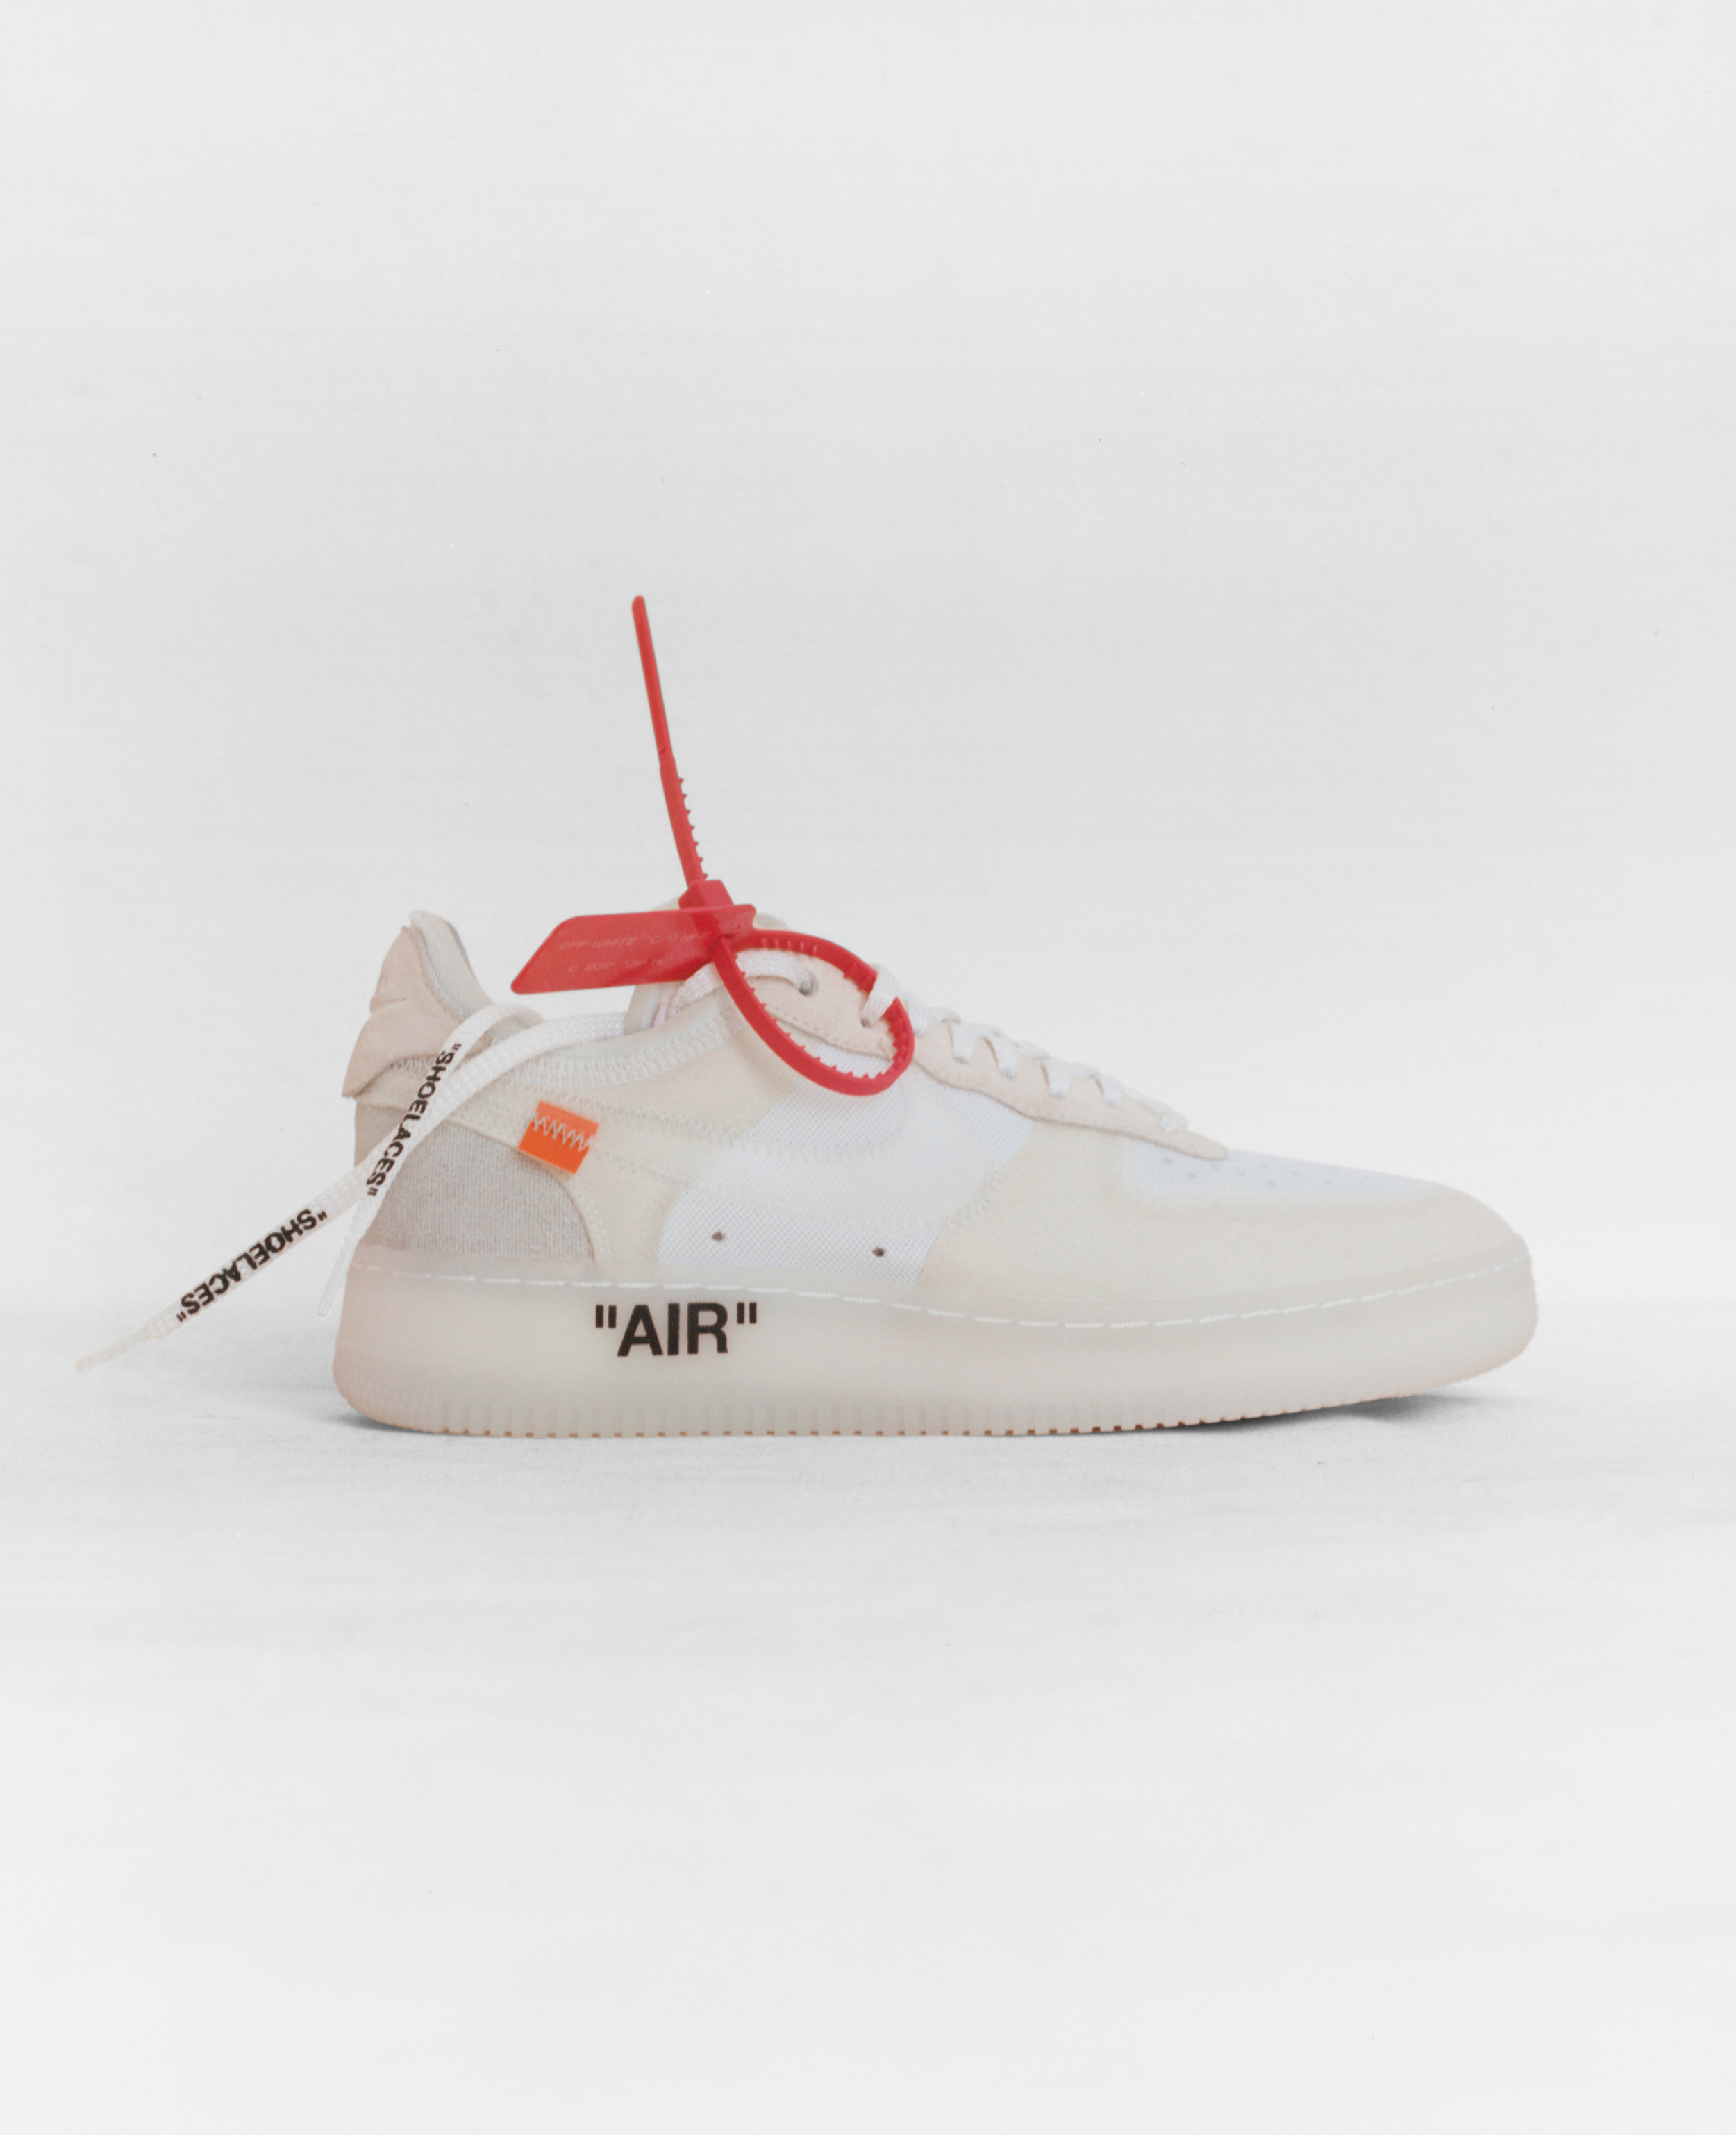 Virgil Abloh Hints at Future Nike Projects